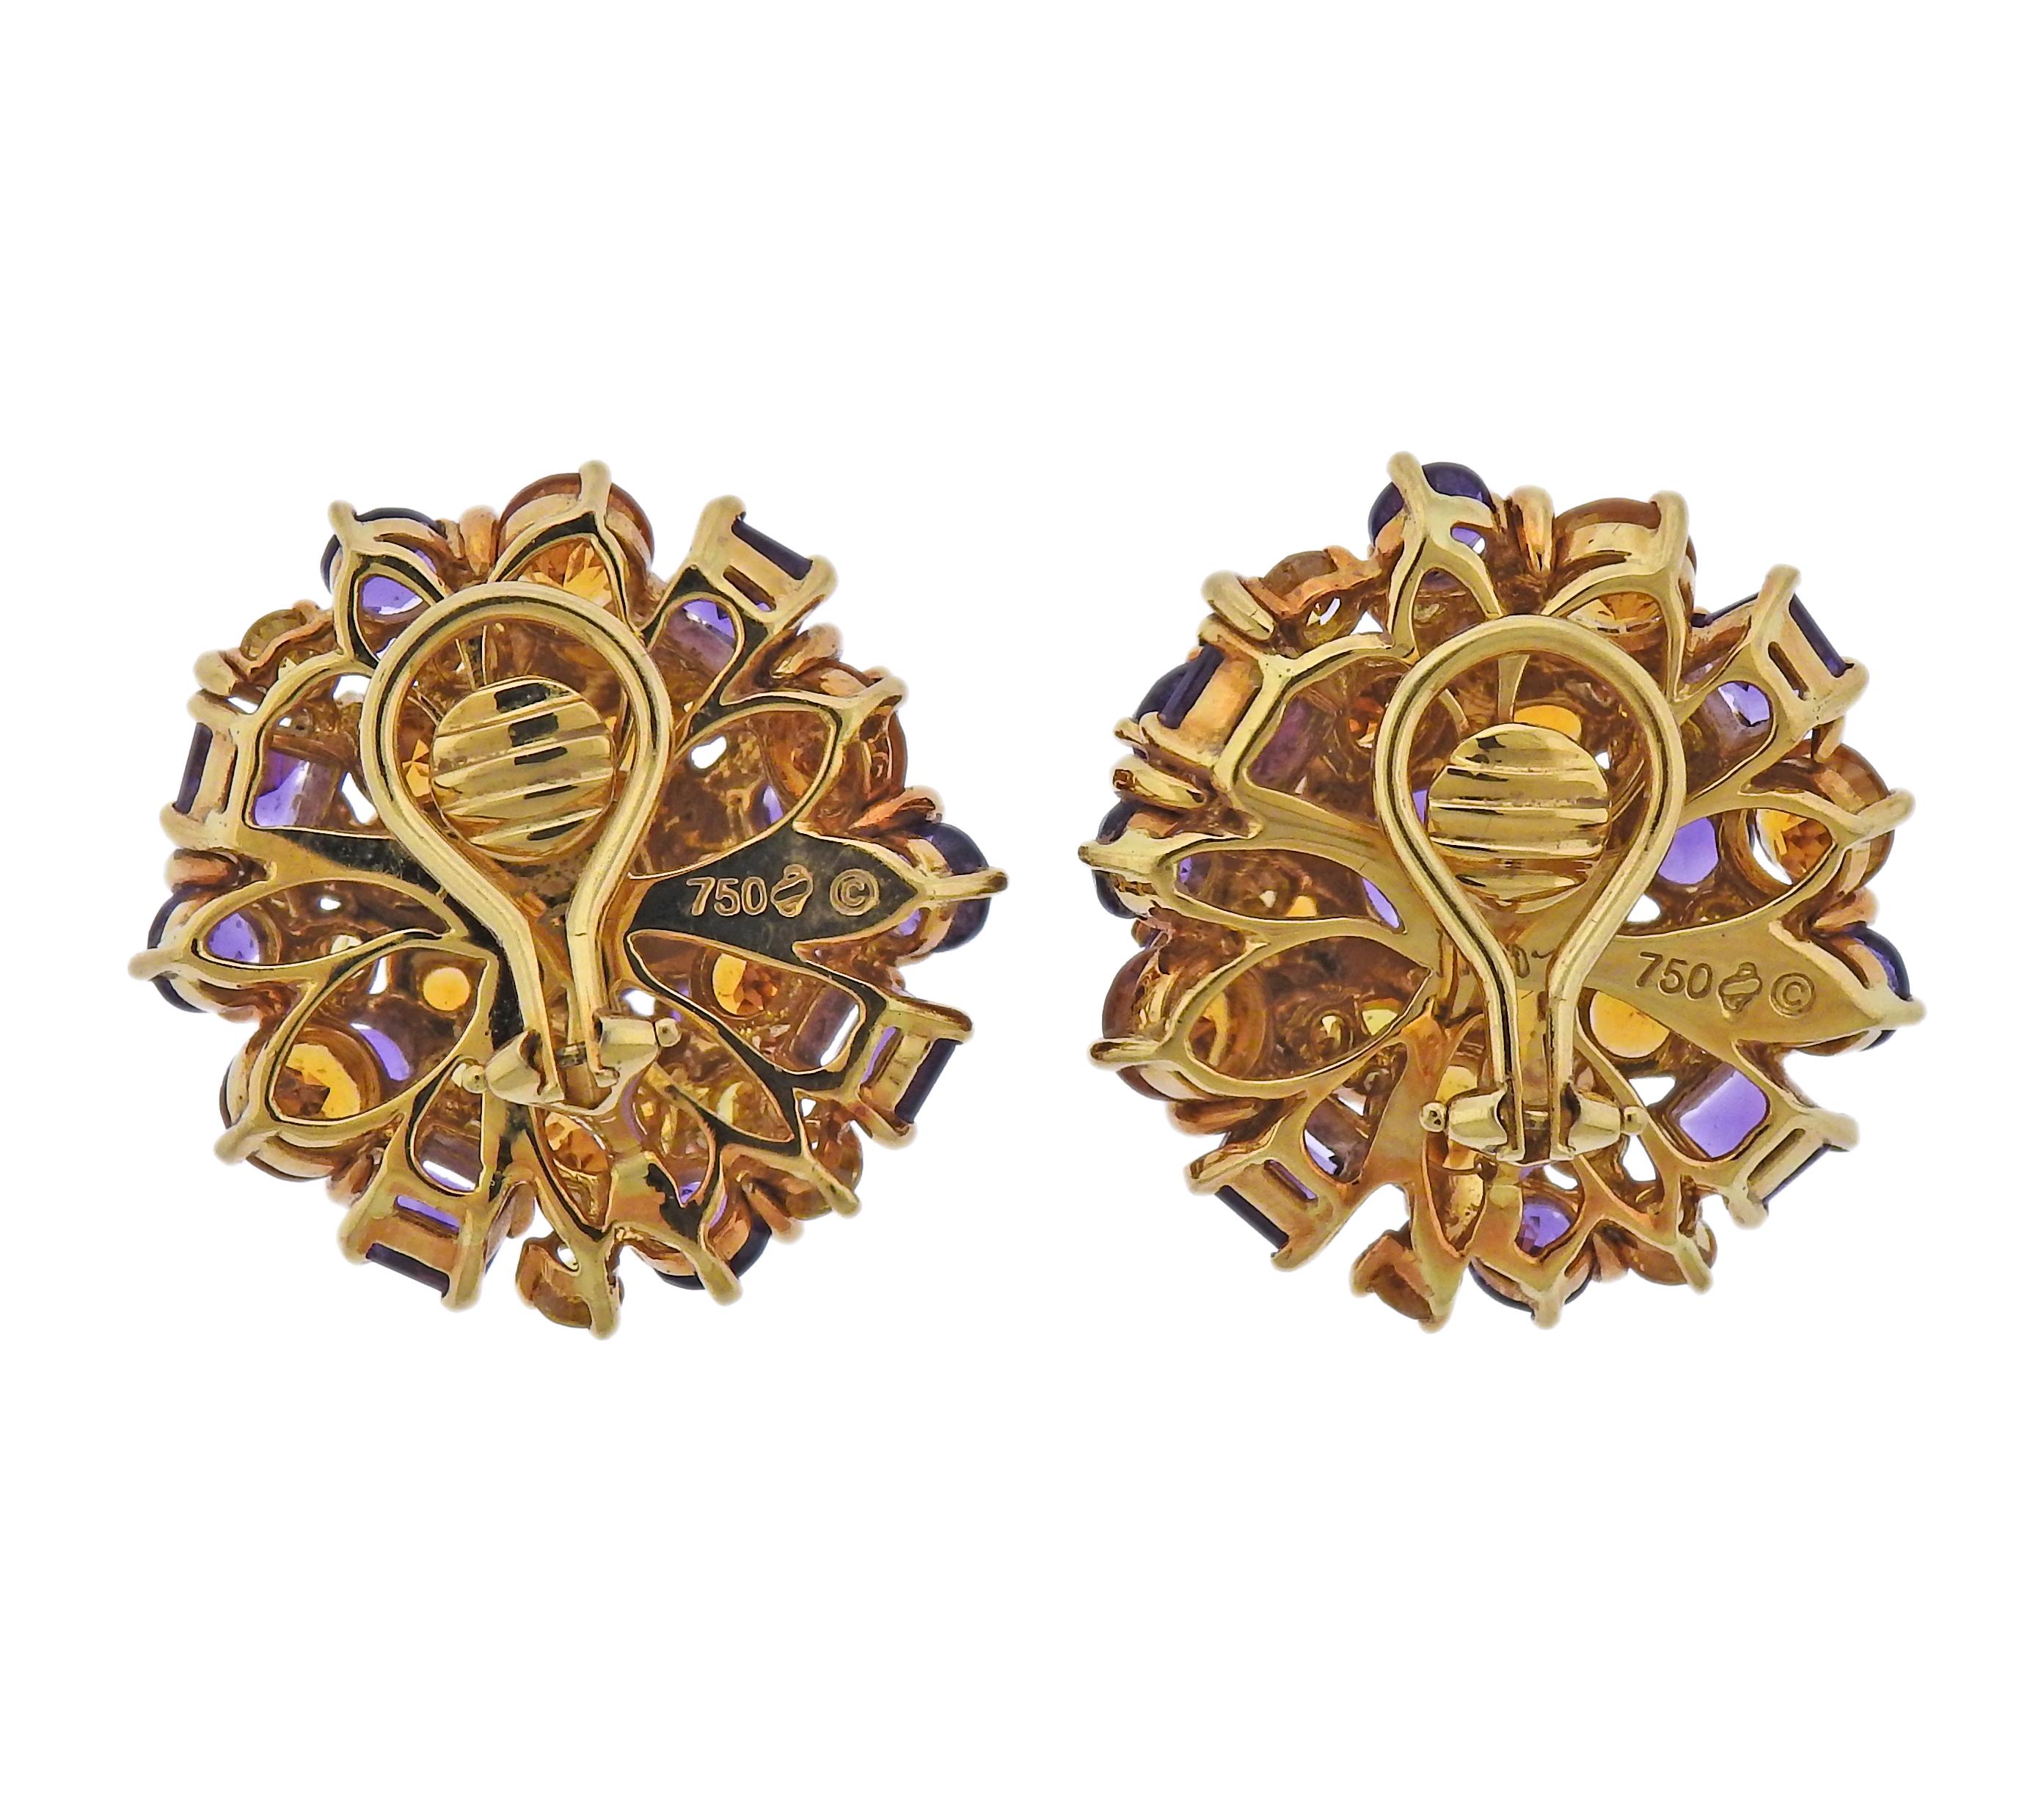 Round Cut Seaman Schepps Amethyst Citrine Gold Cocktail Earrings For Sale